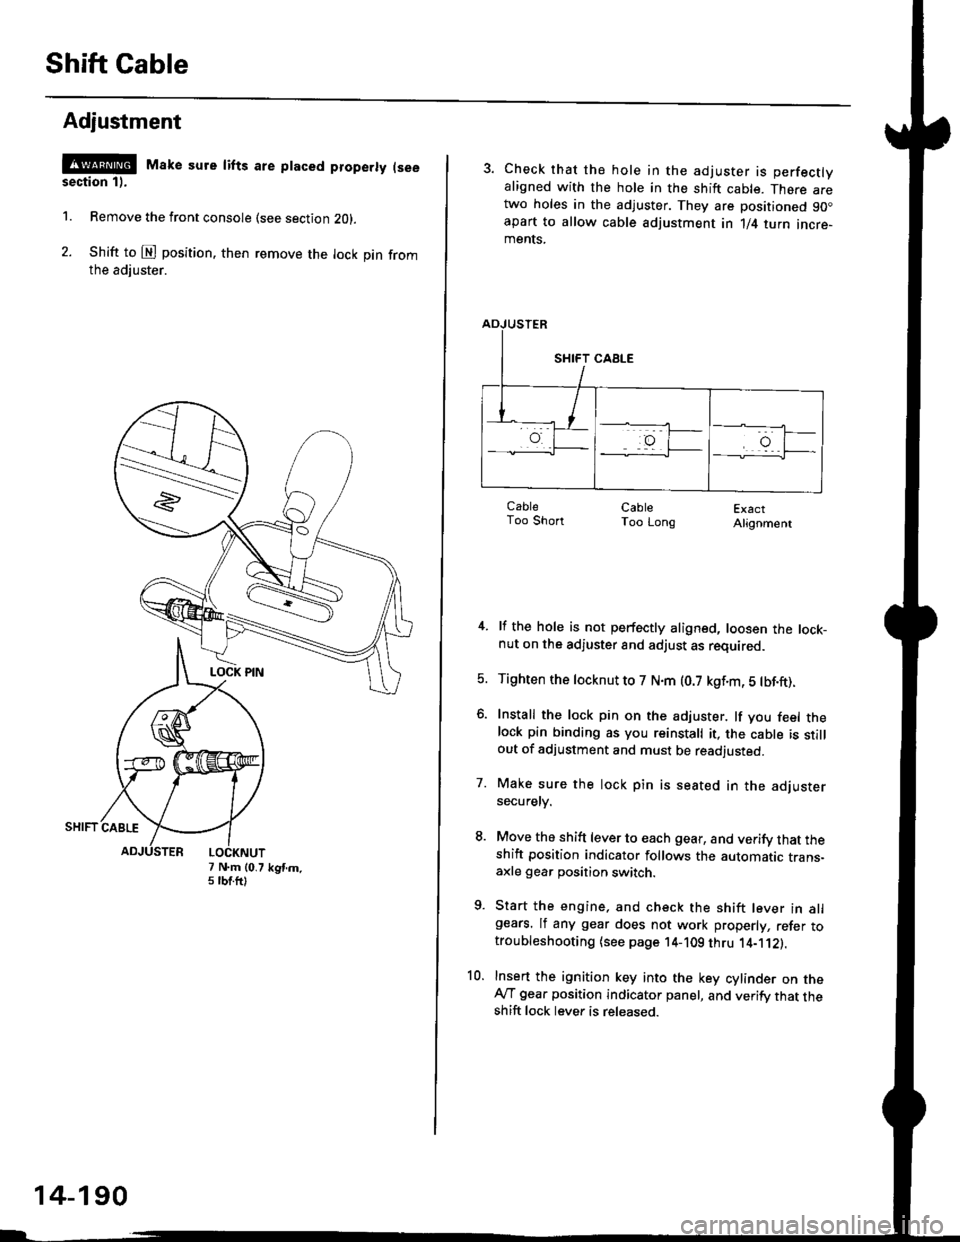 HONDA CIVIC 2000 6.G Workshop Manual Shift Cable
Adjustment
@ Make sure lifts are ptaced properly (see
section 1).
1. Remove the front console (see section Z0l.
2. Shift to @ position. then remove the lock pin fromthe adiuster.
7 N.m (0.